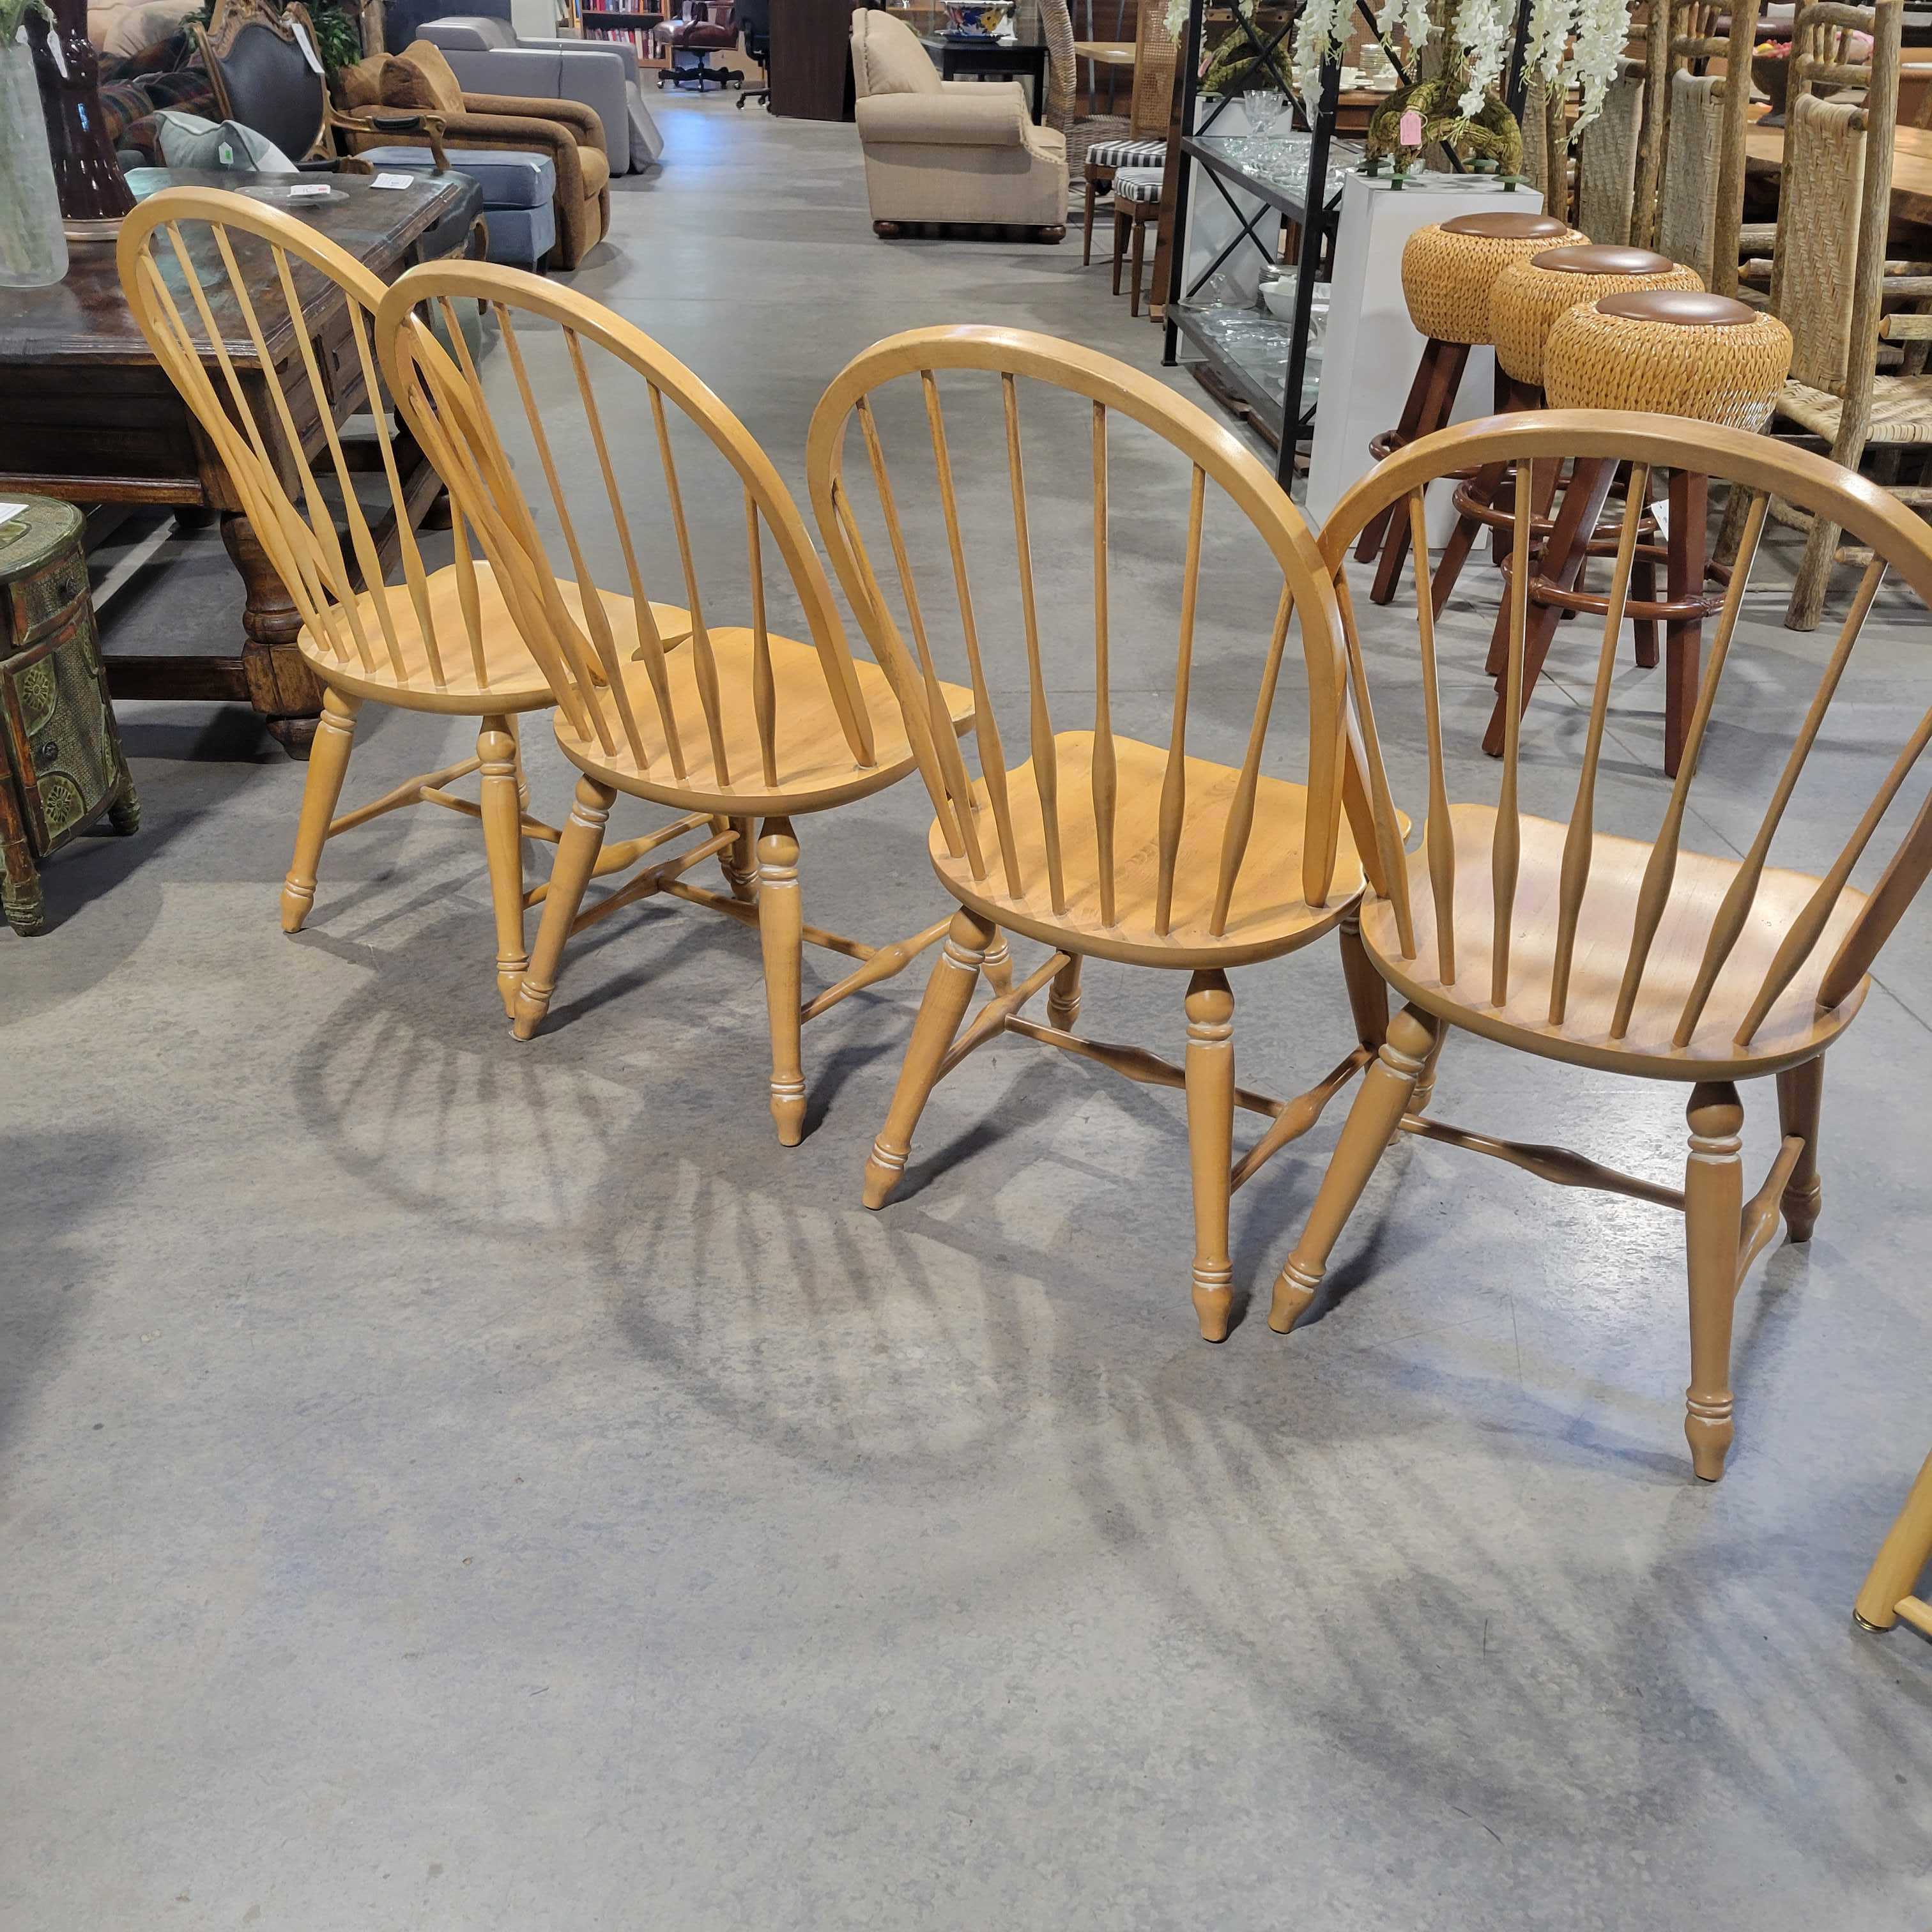 SET of 4 Light Wood Spindle Back Dining Chairs